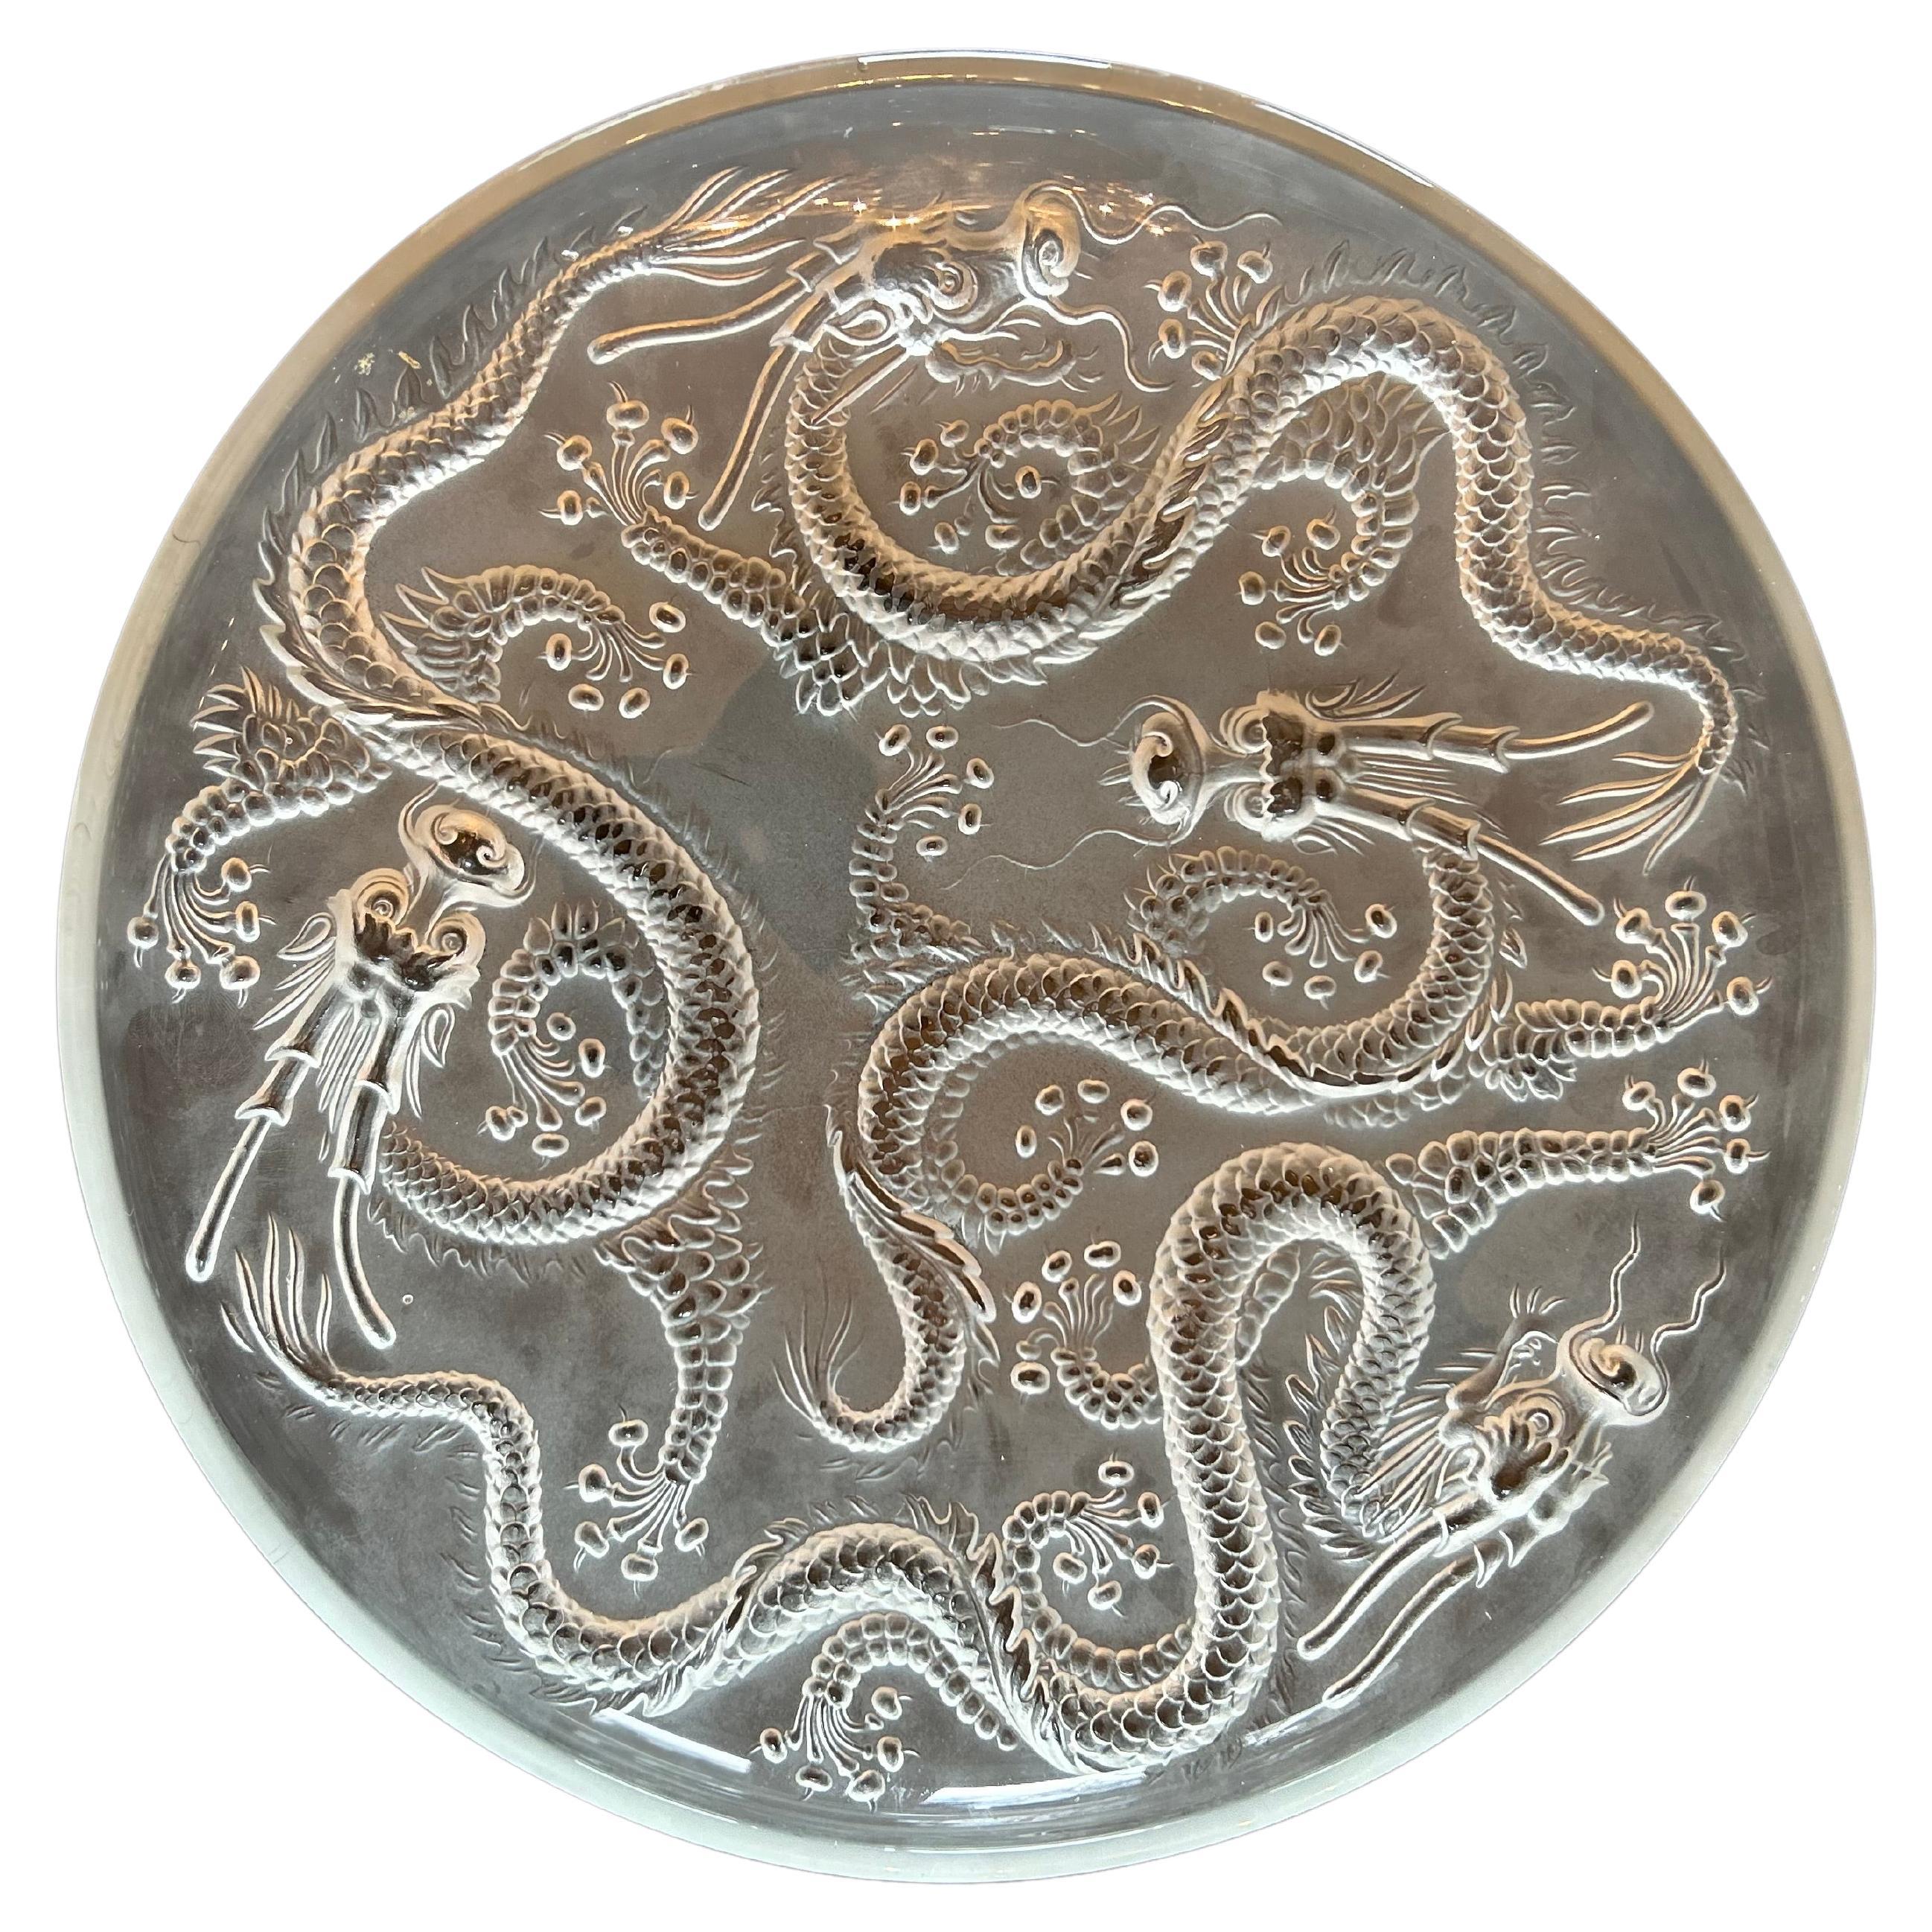 Large Frosted Glass Bowl With Dragons by Josef Inwald for Barolac, 1930